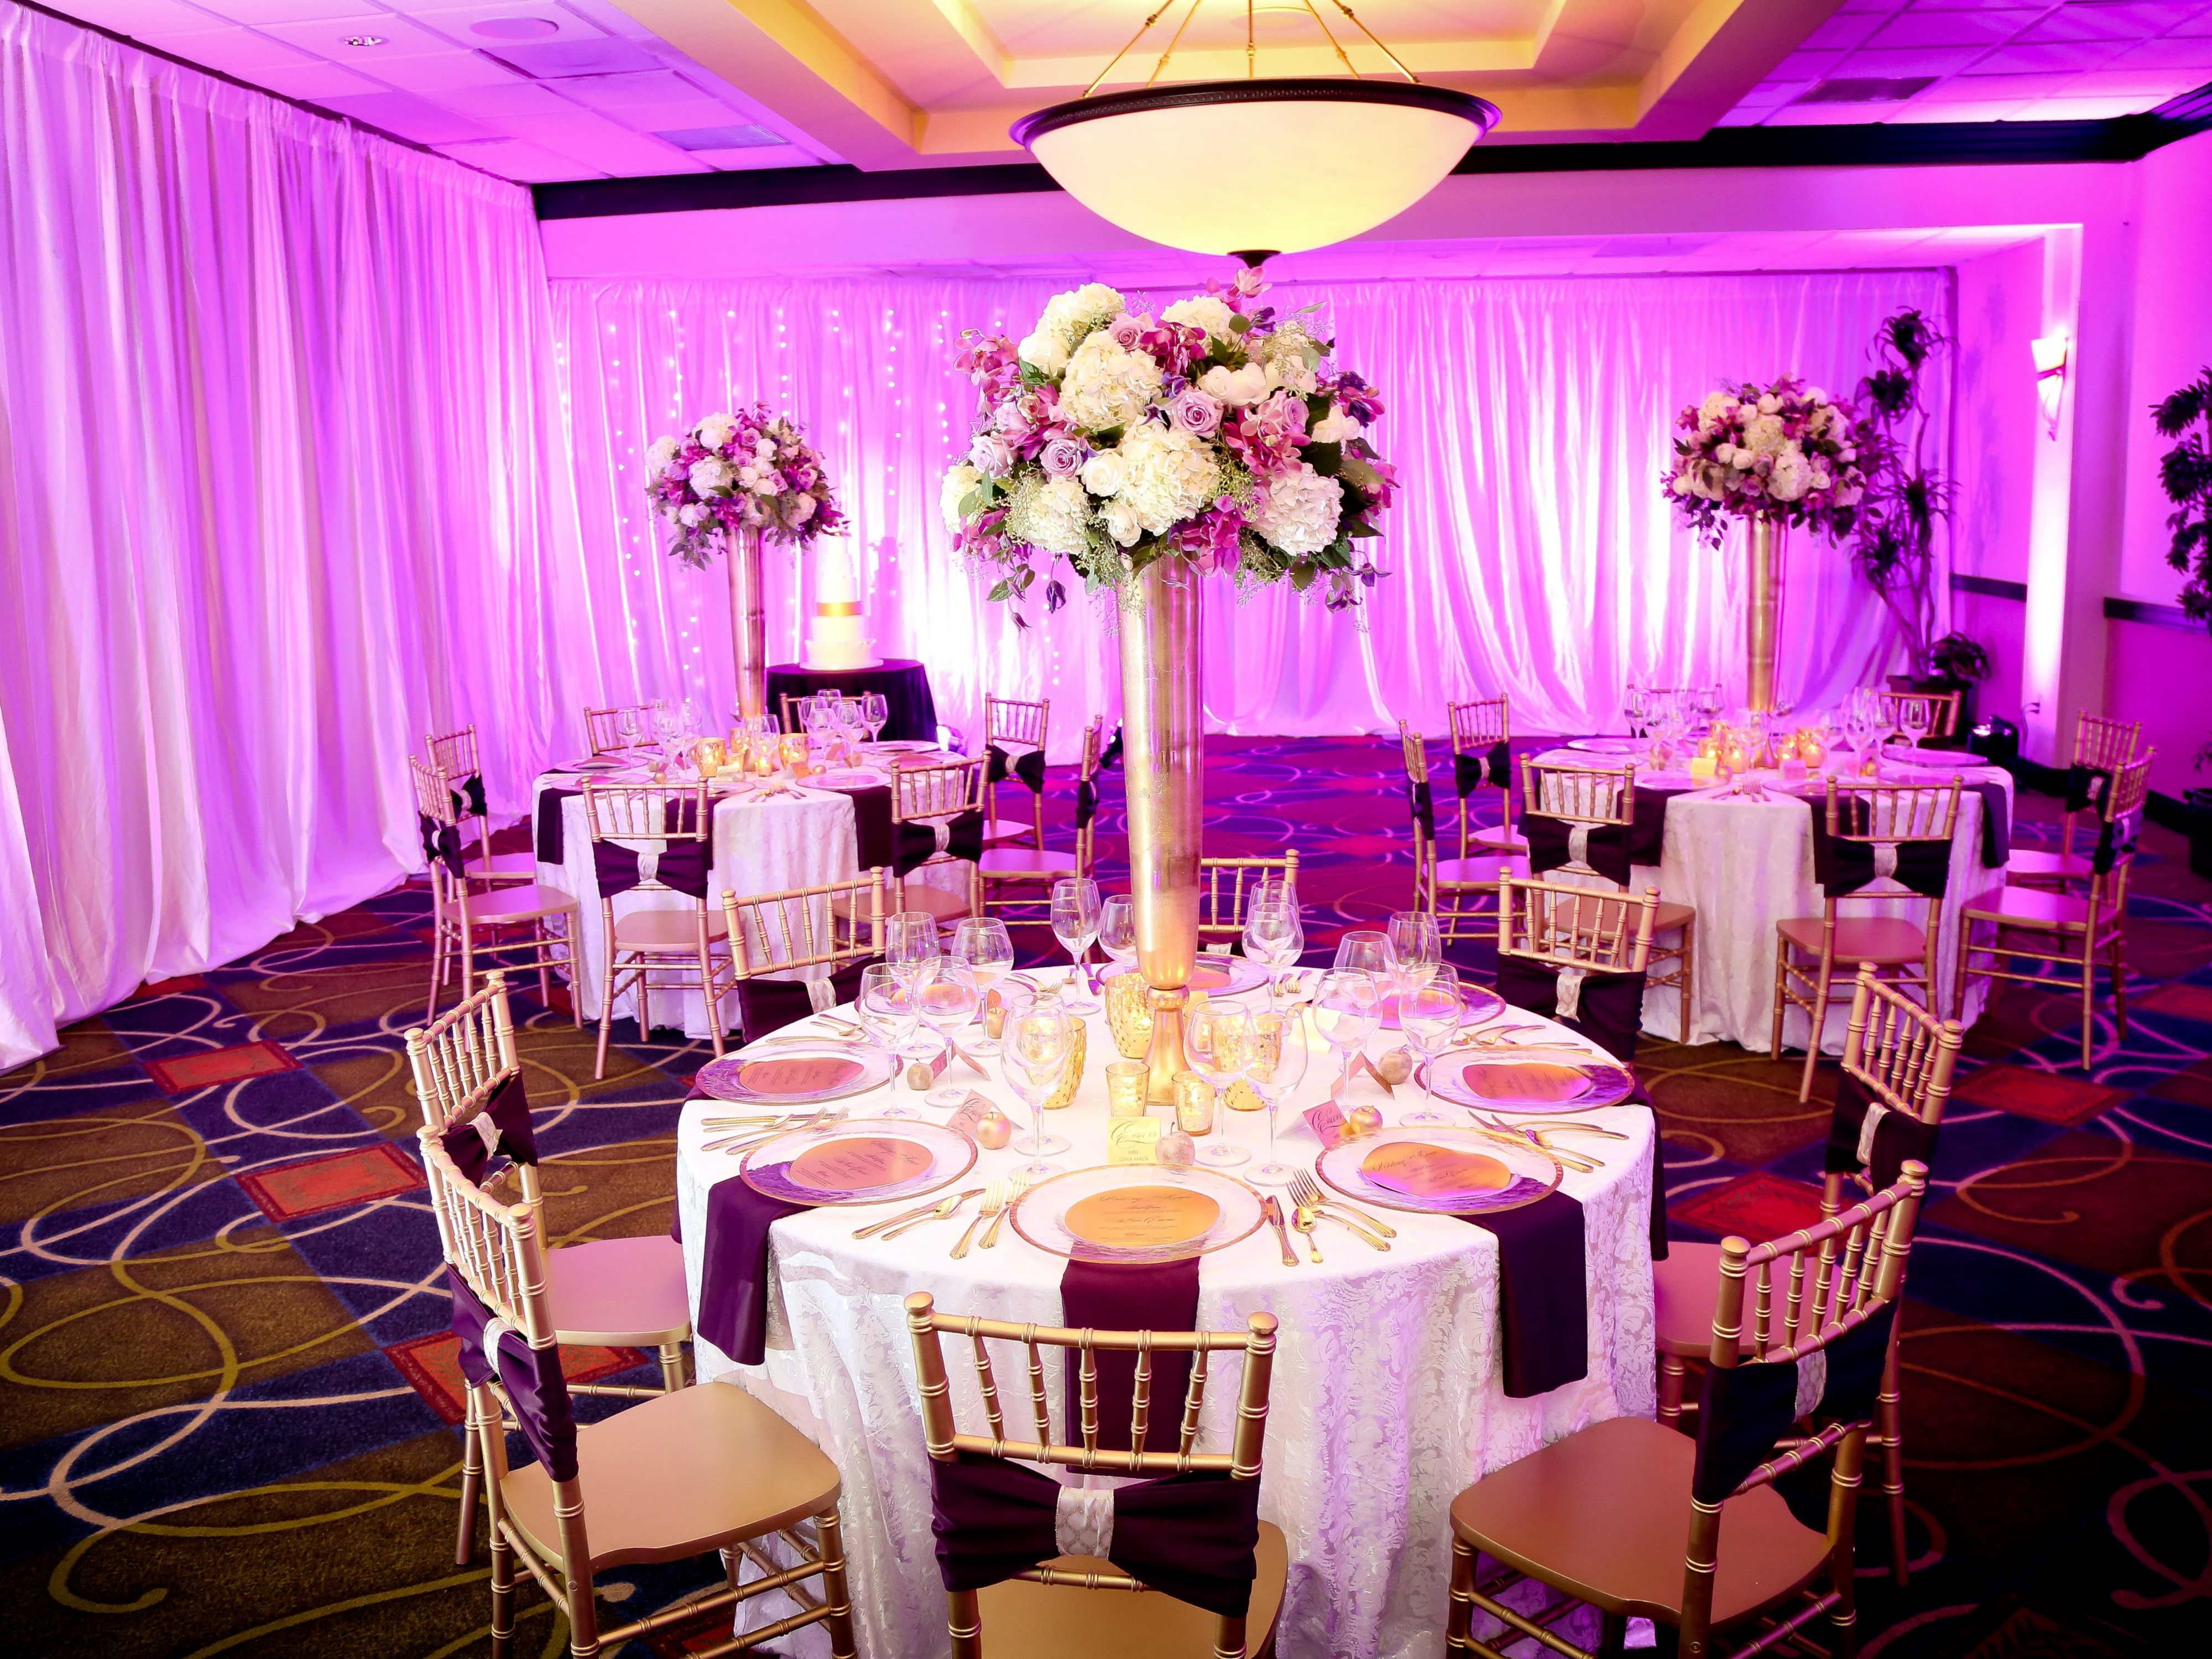 Celebrate in our contemporary wedding venues in Fort Myers. See your wedding dreams come true in our 5,000-square-foot ballroom, which seats 250 guests, or host a bridal shower in one of our meeting rooms. With tropical plants, palm trees, and twinkling lights, our clay-tiled terrace is perfect for an outdoor wedding reception or cocktail party.​